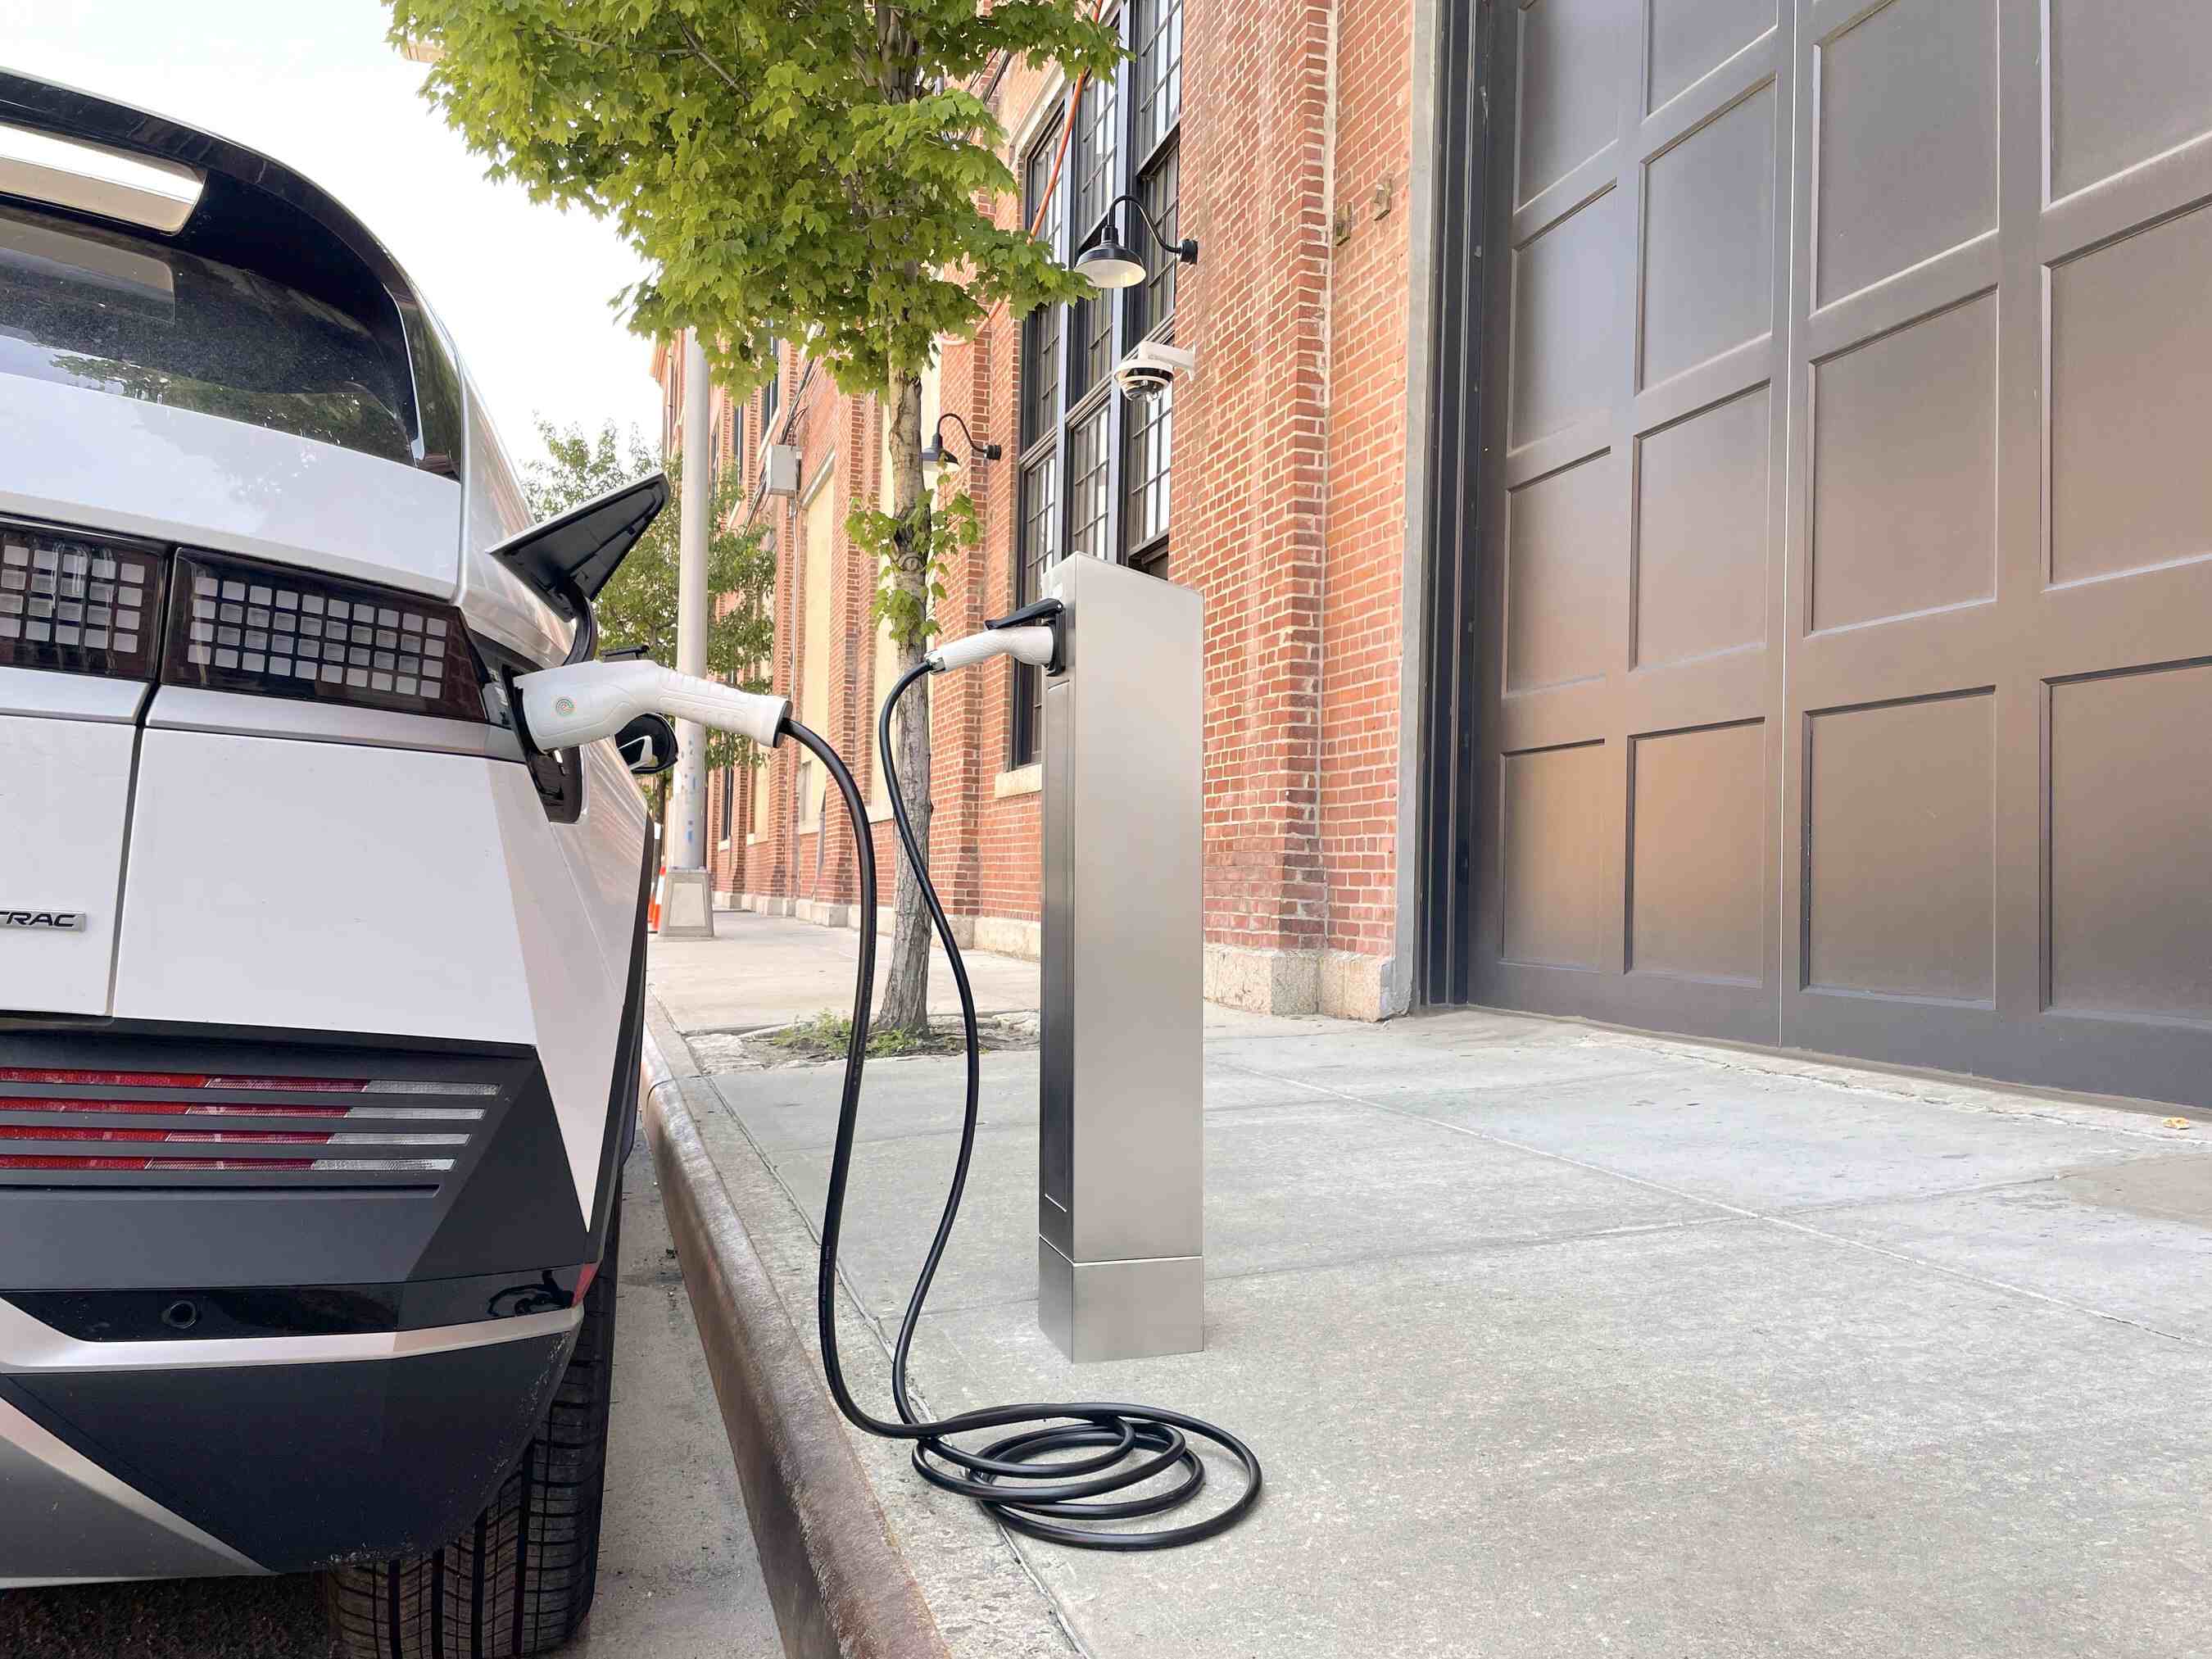 An Itselectric curbside charger with fully detachable charging cord. Photo: Itselectric